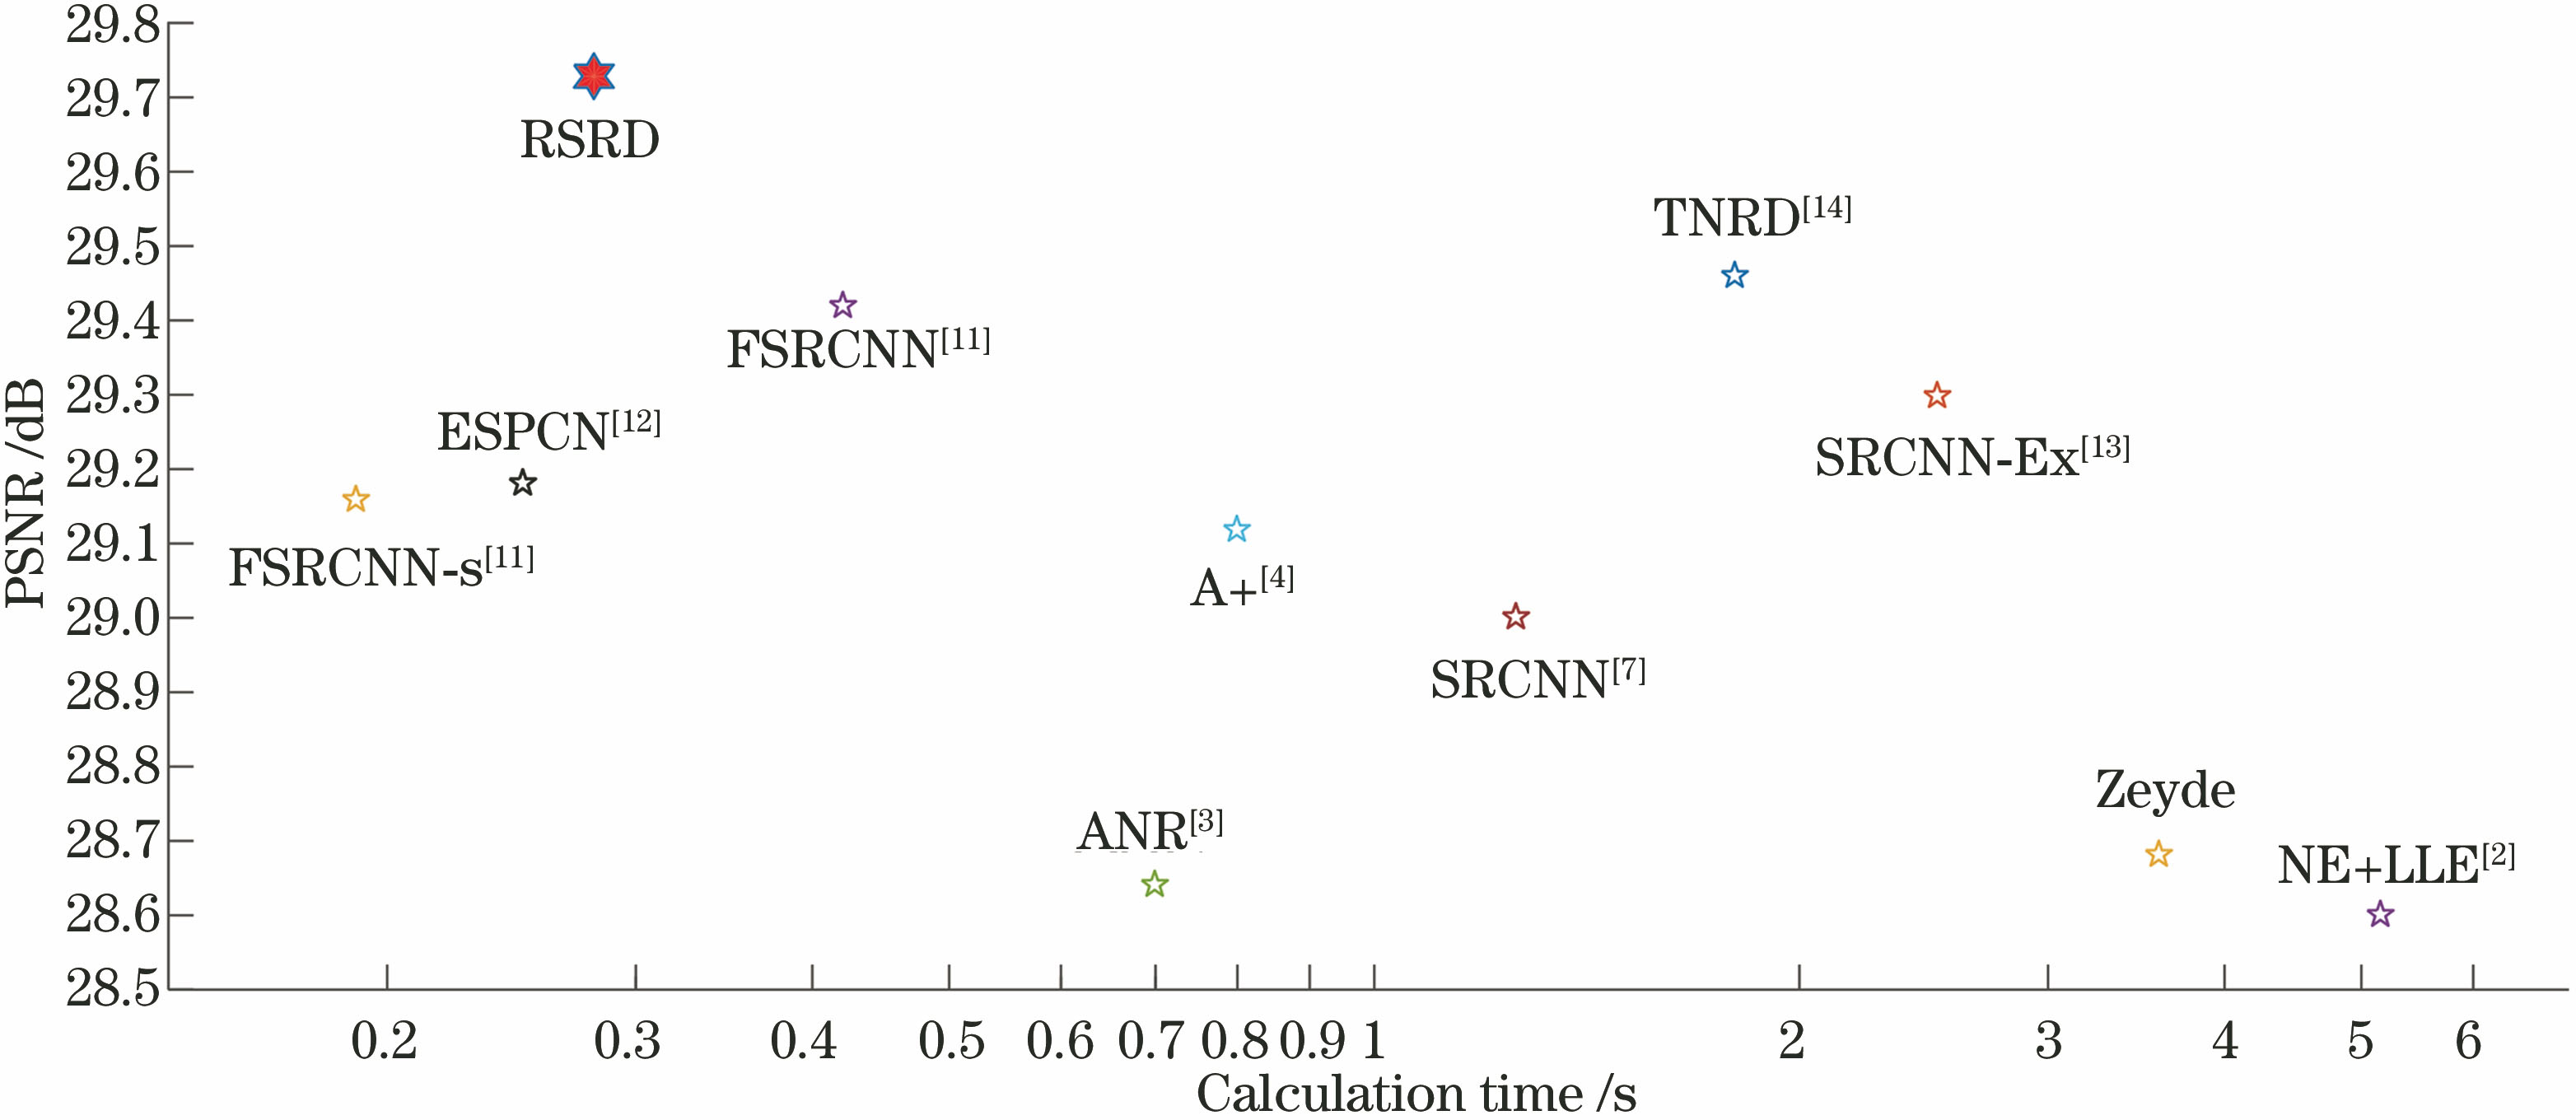 PSNR versus calculation time for different methods performing super-resolution over Set14 with magnification factor of 3